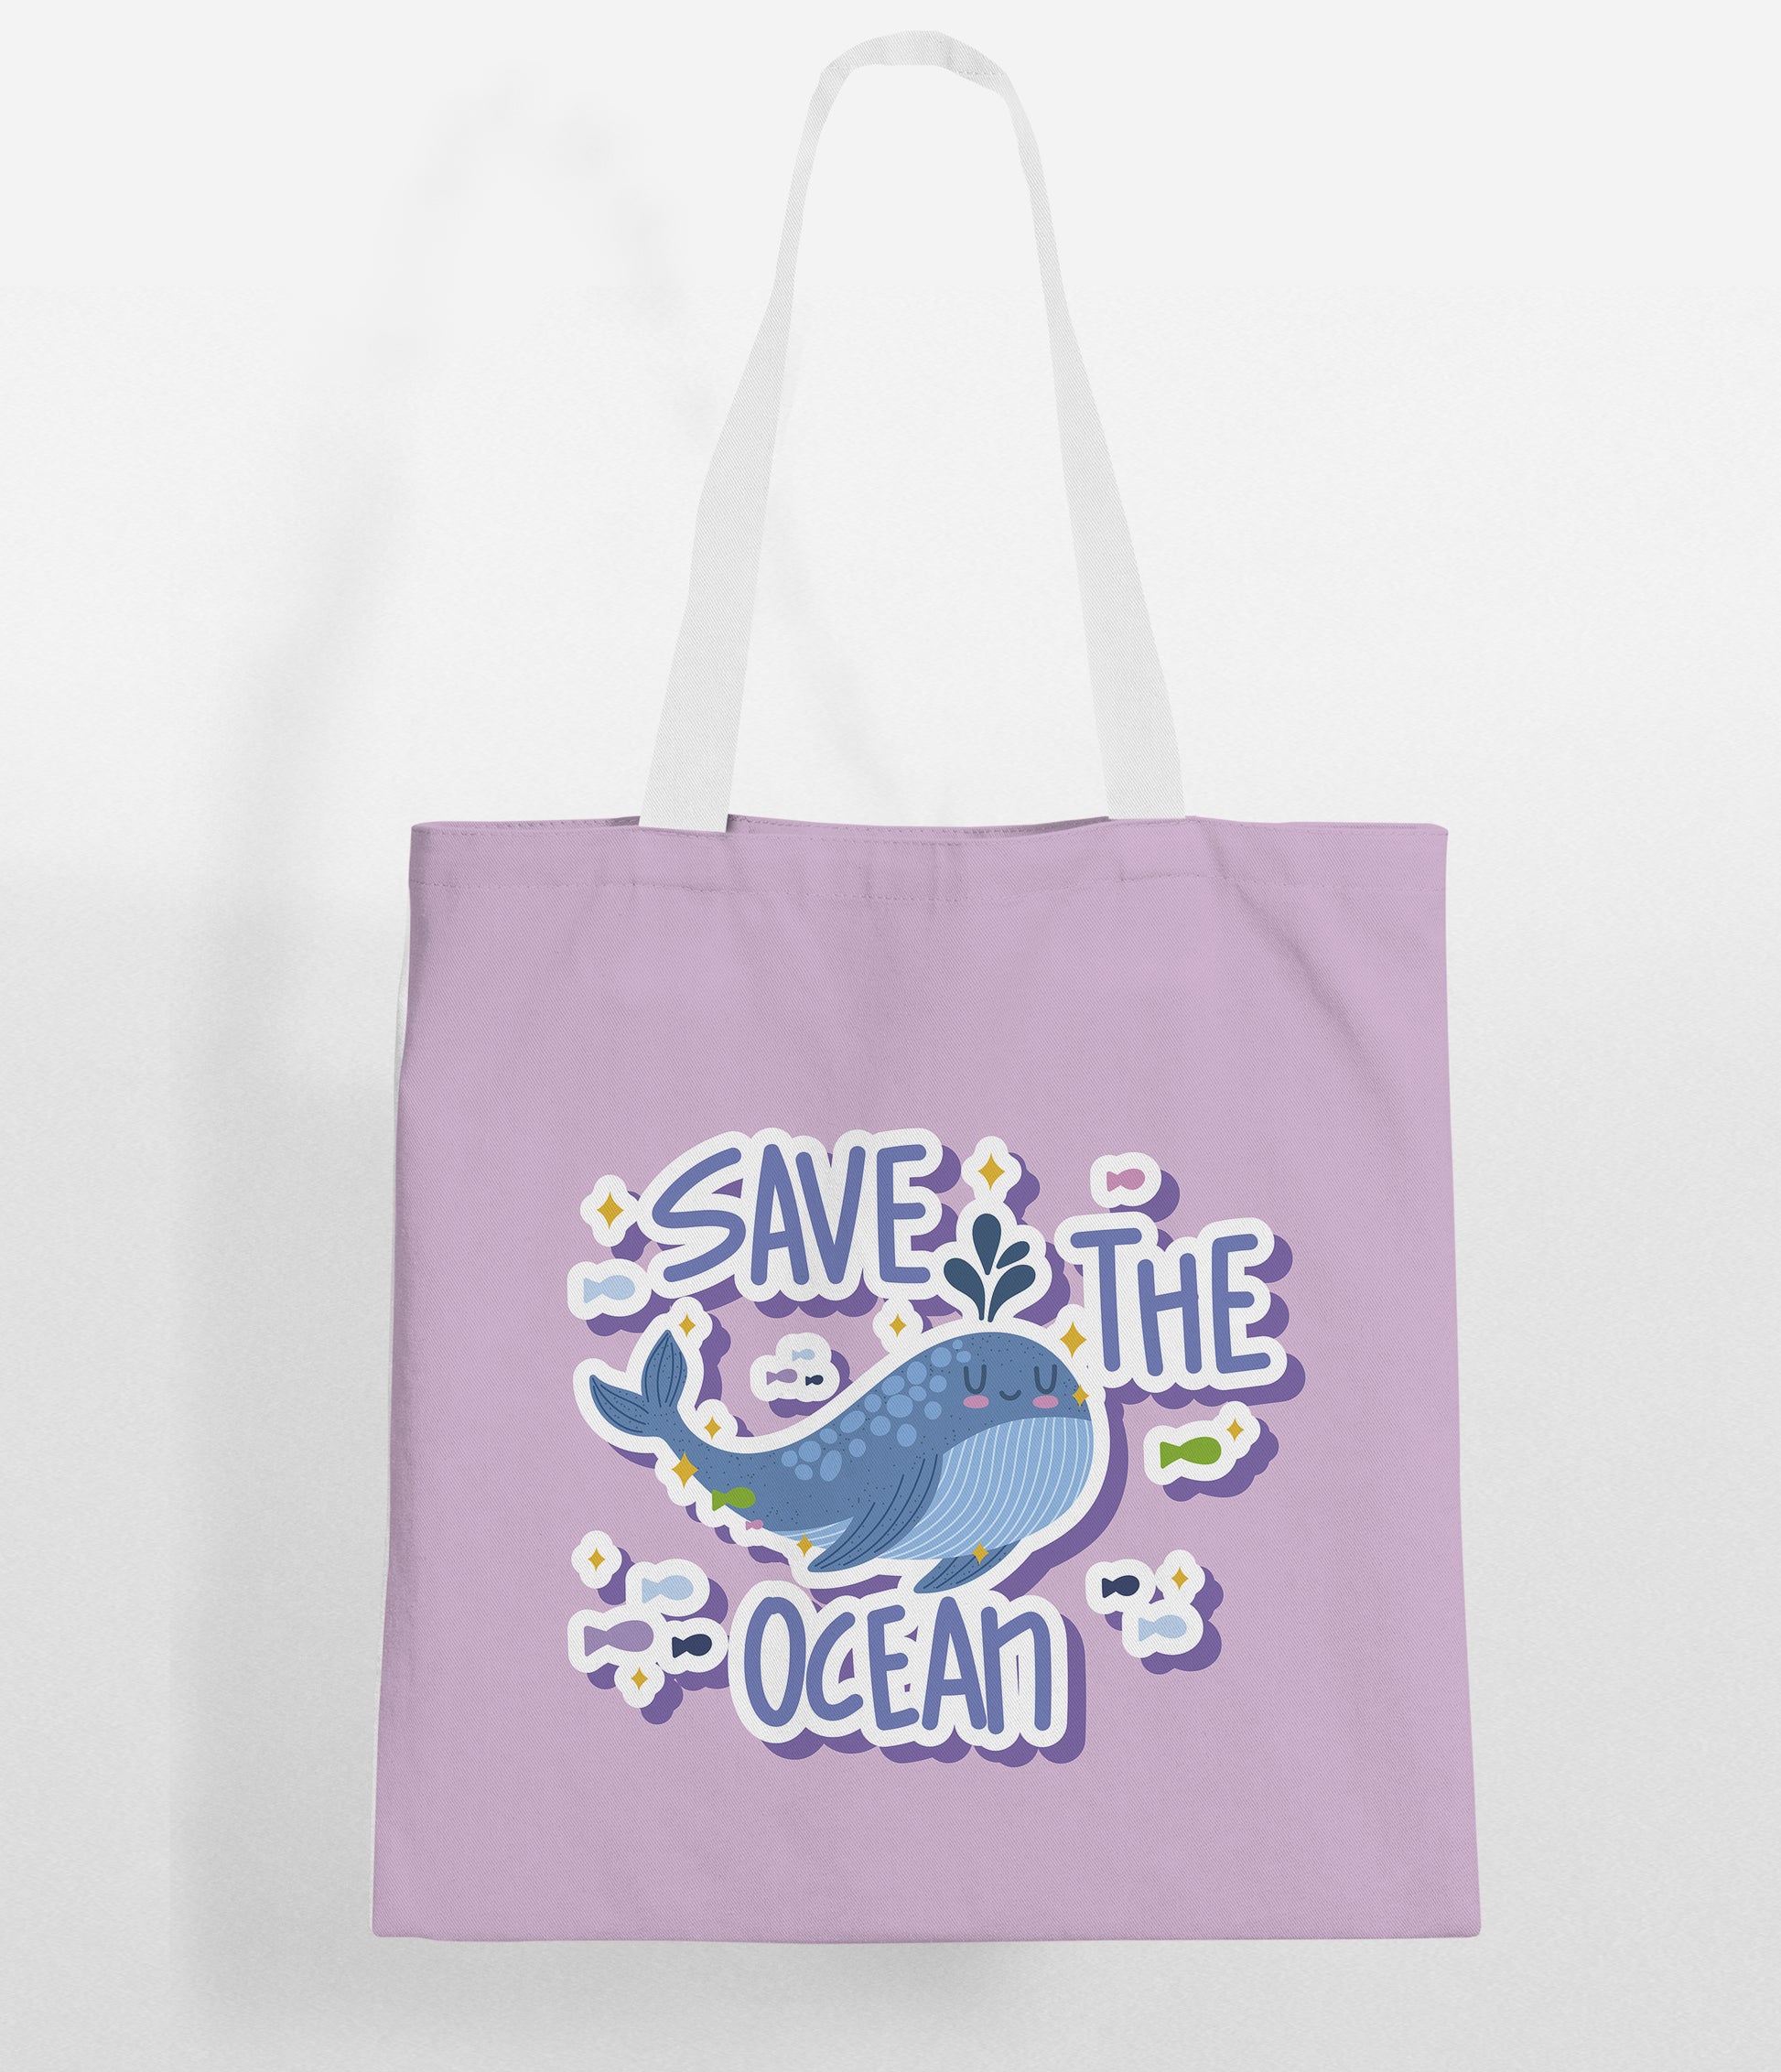 A reusable tote bag with the words "Save the Ocean" printed on it, promoting environmental awareness and sustainability.